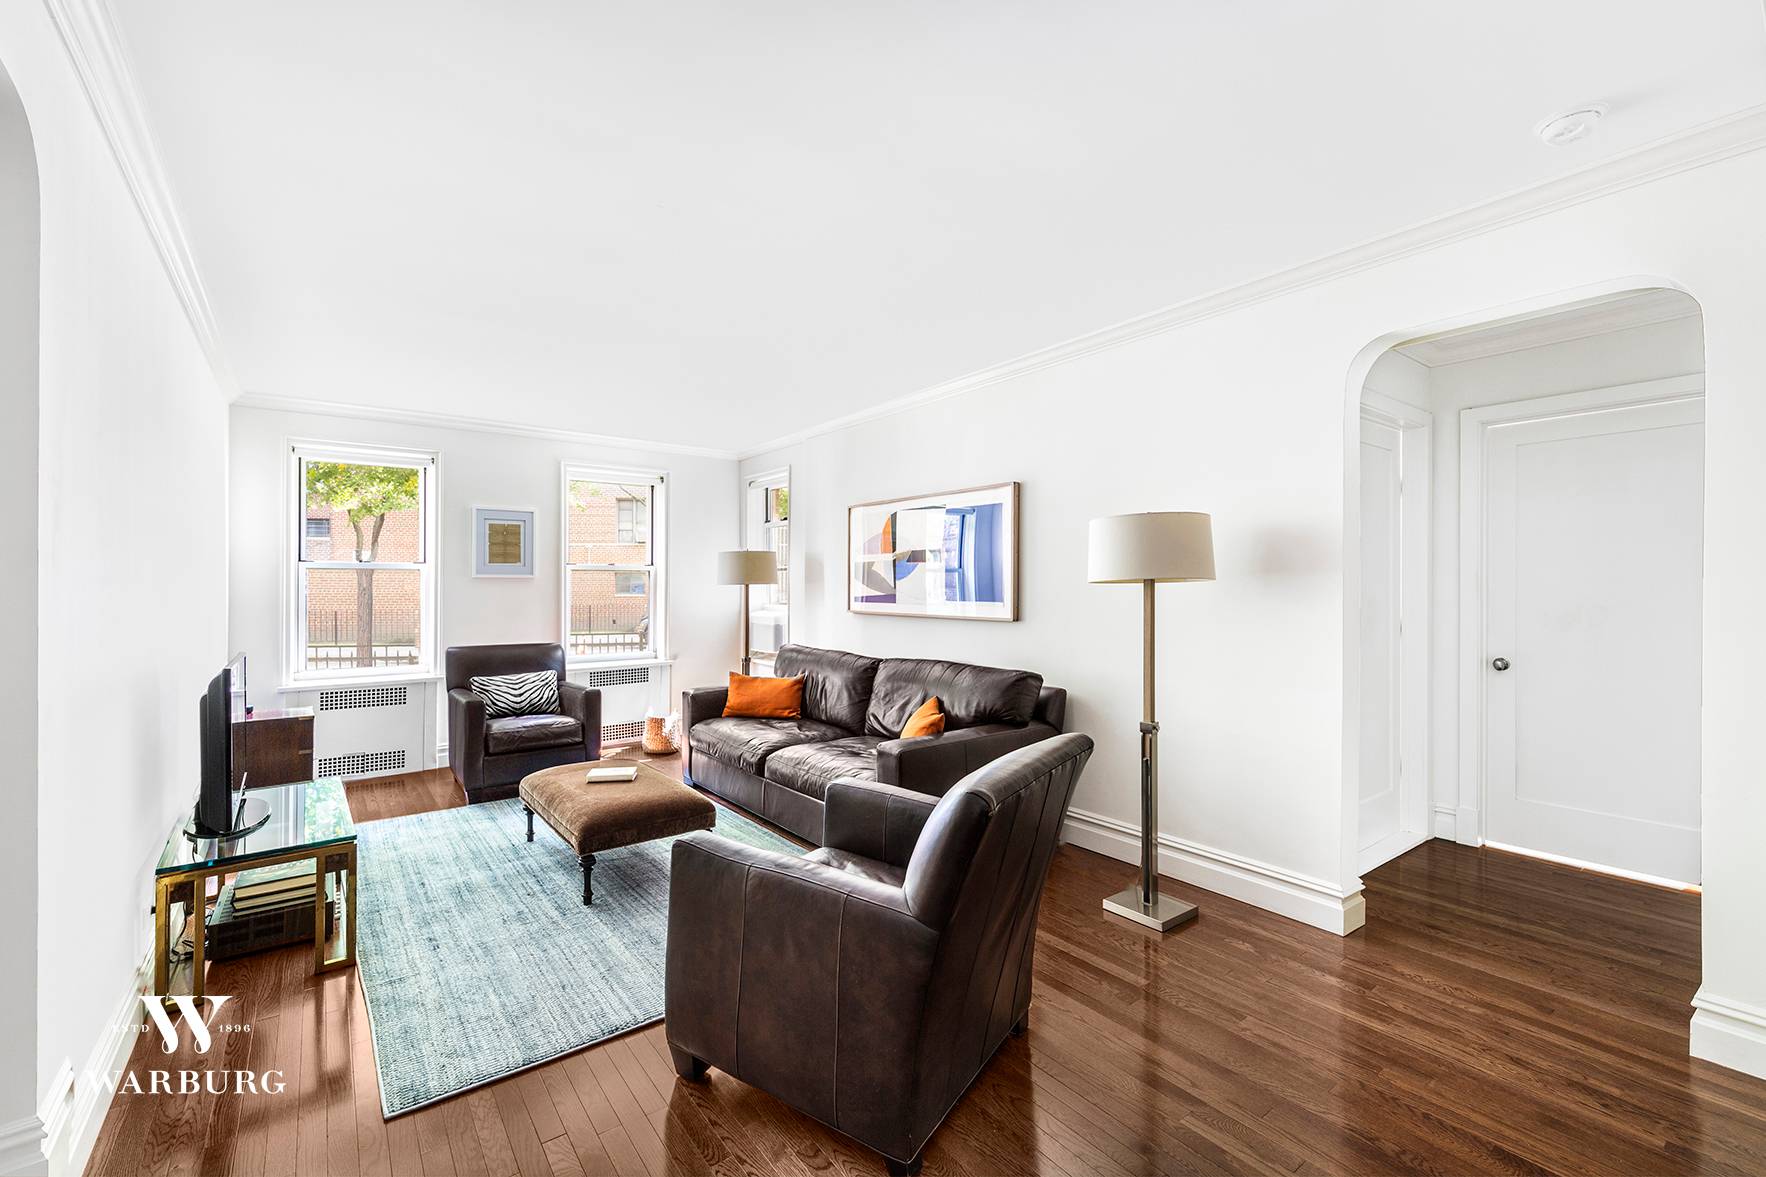 This mint condition C line apartment is the largest and most sought after one bedroom apartment at Washington Plaza, one of Jackson Heights premiere DOORMAN co ops.